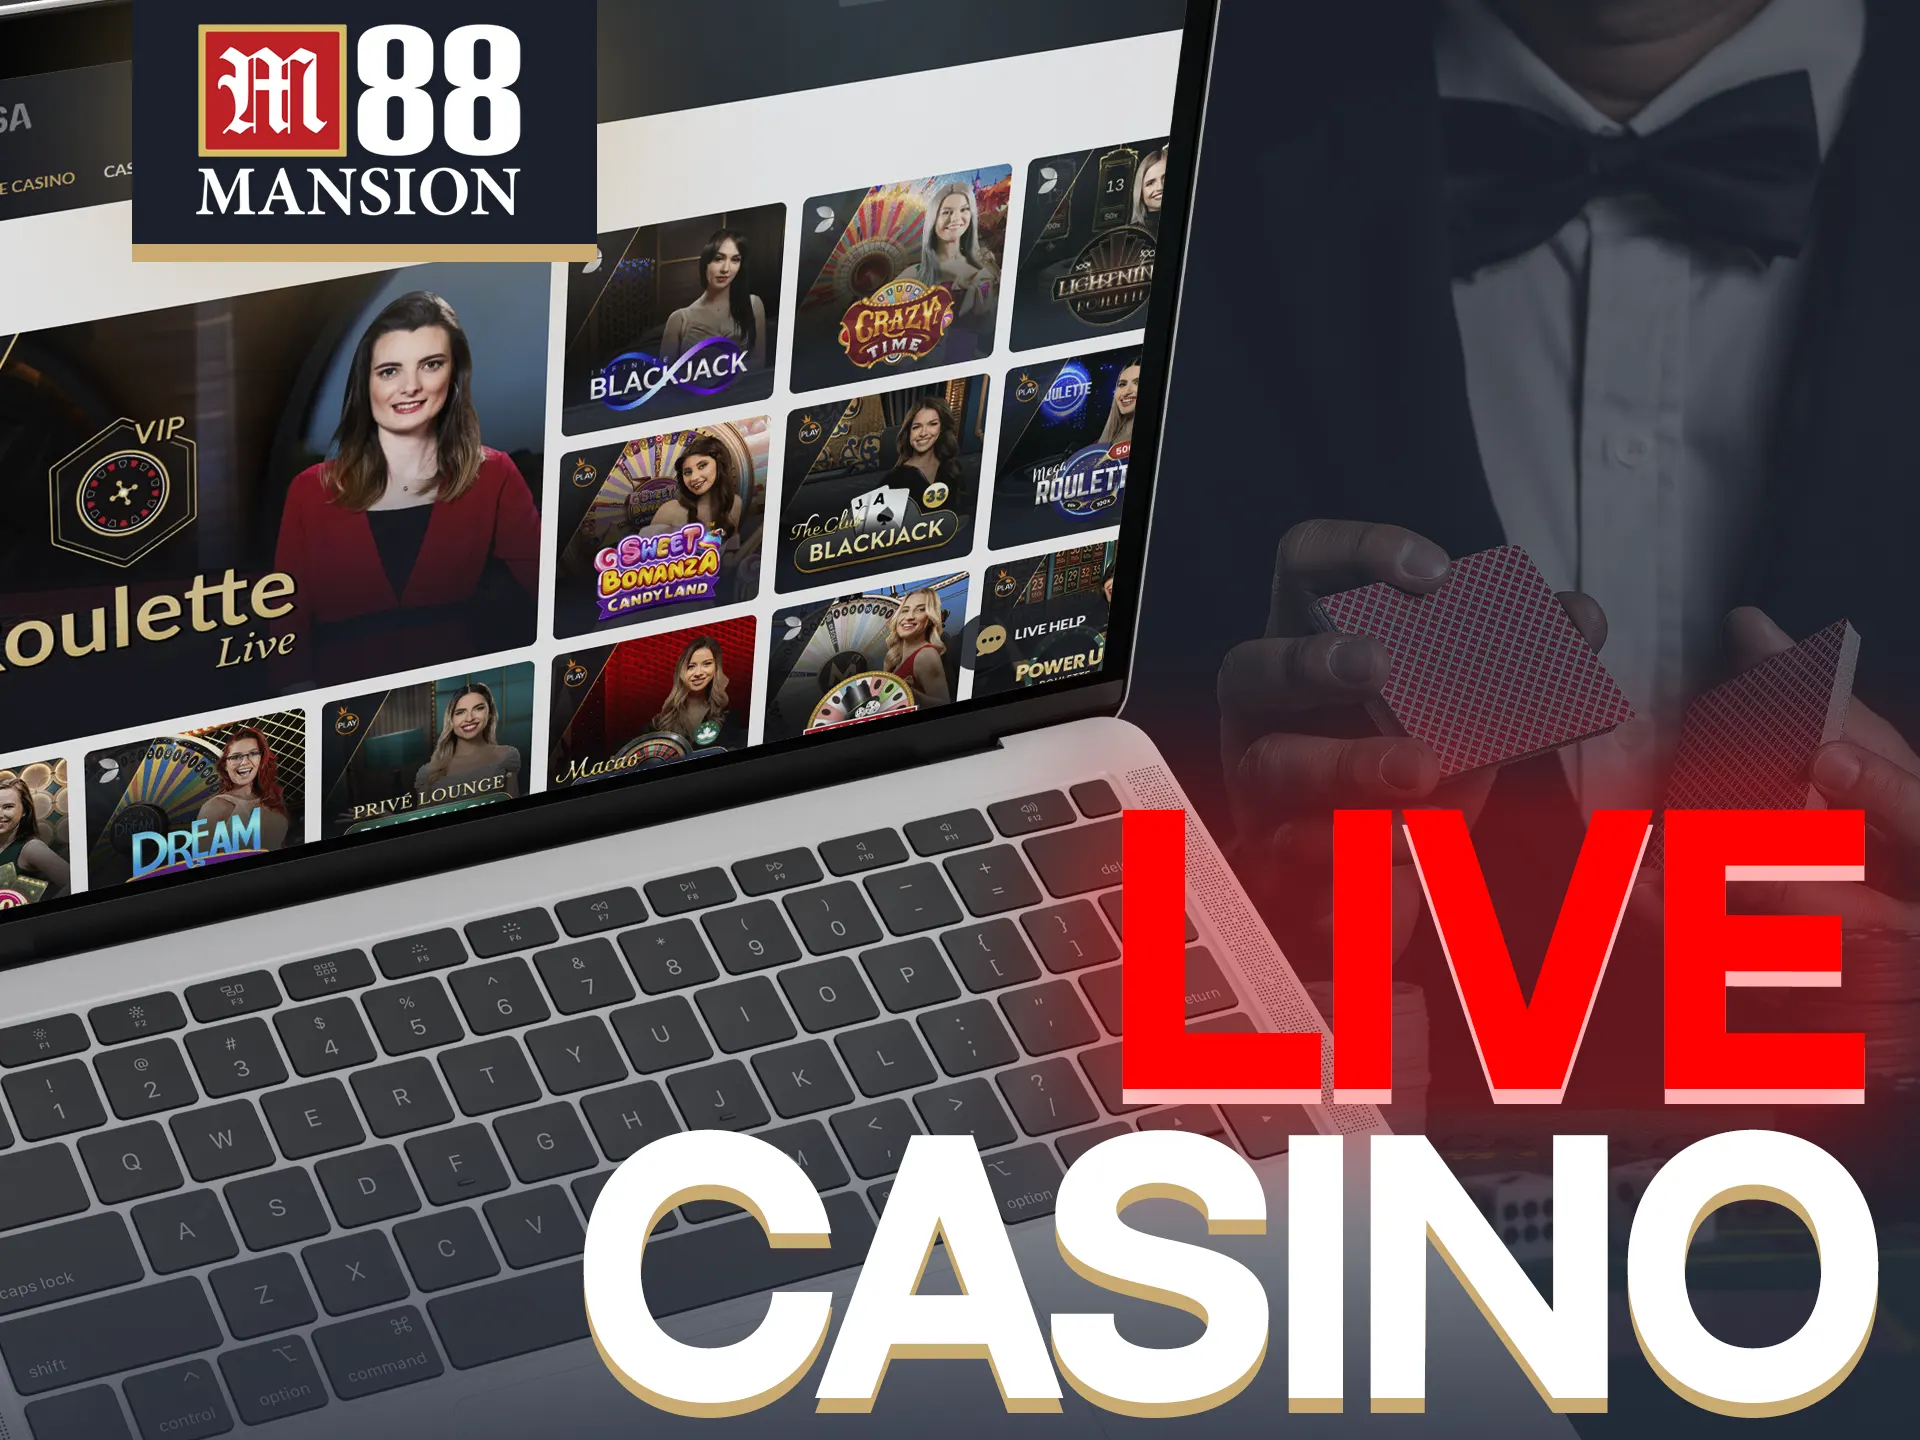 M88 offers realistic gaming with live dealers.